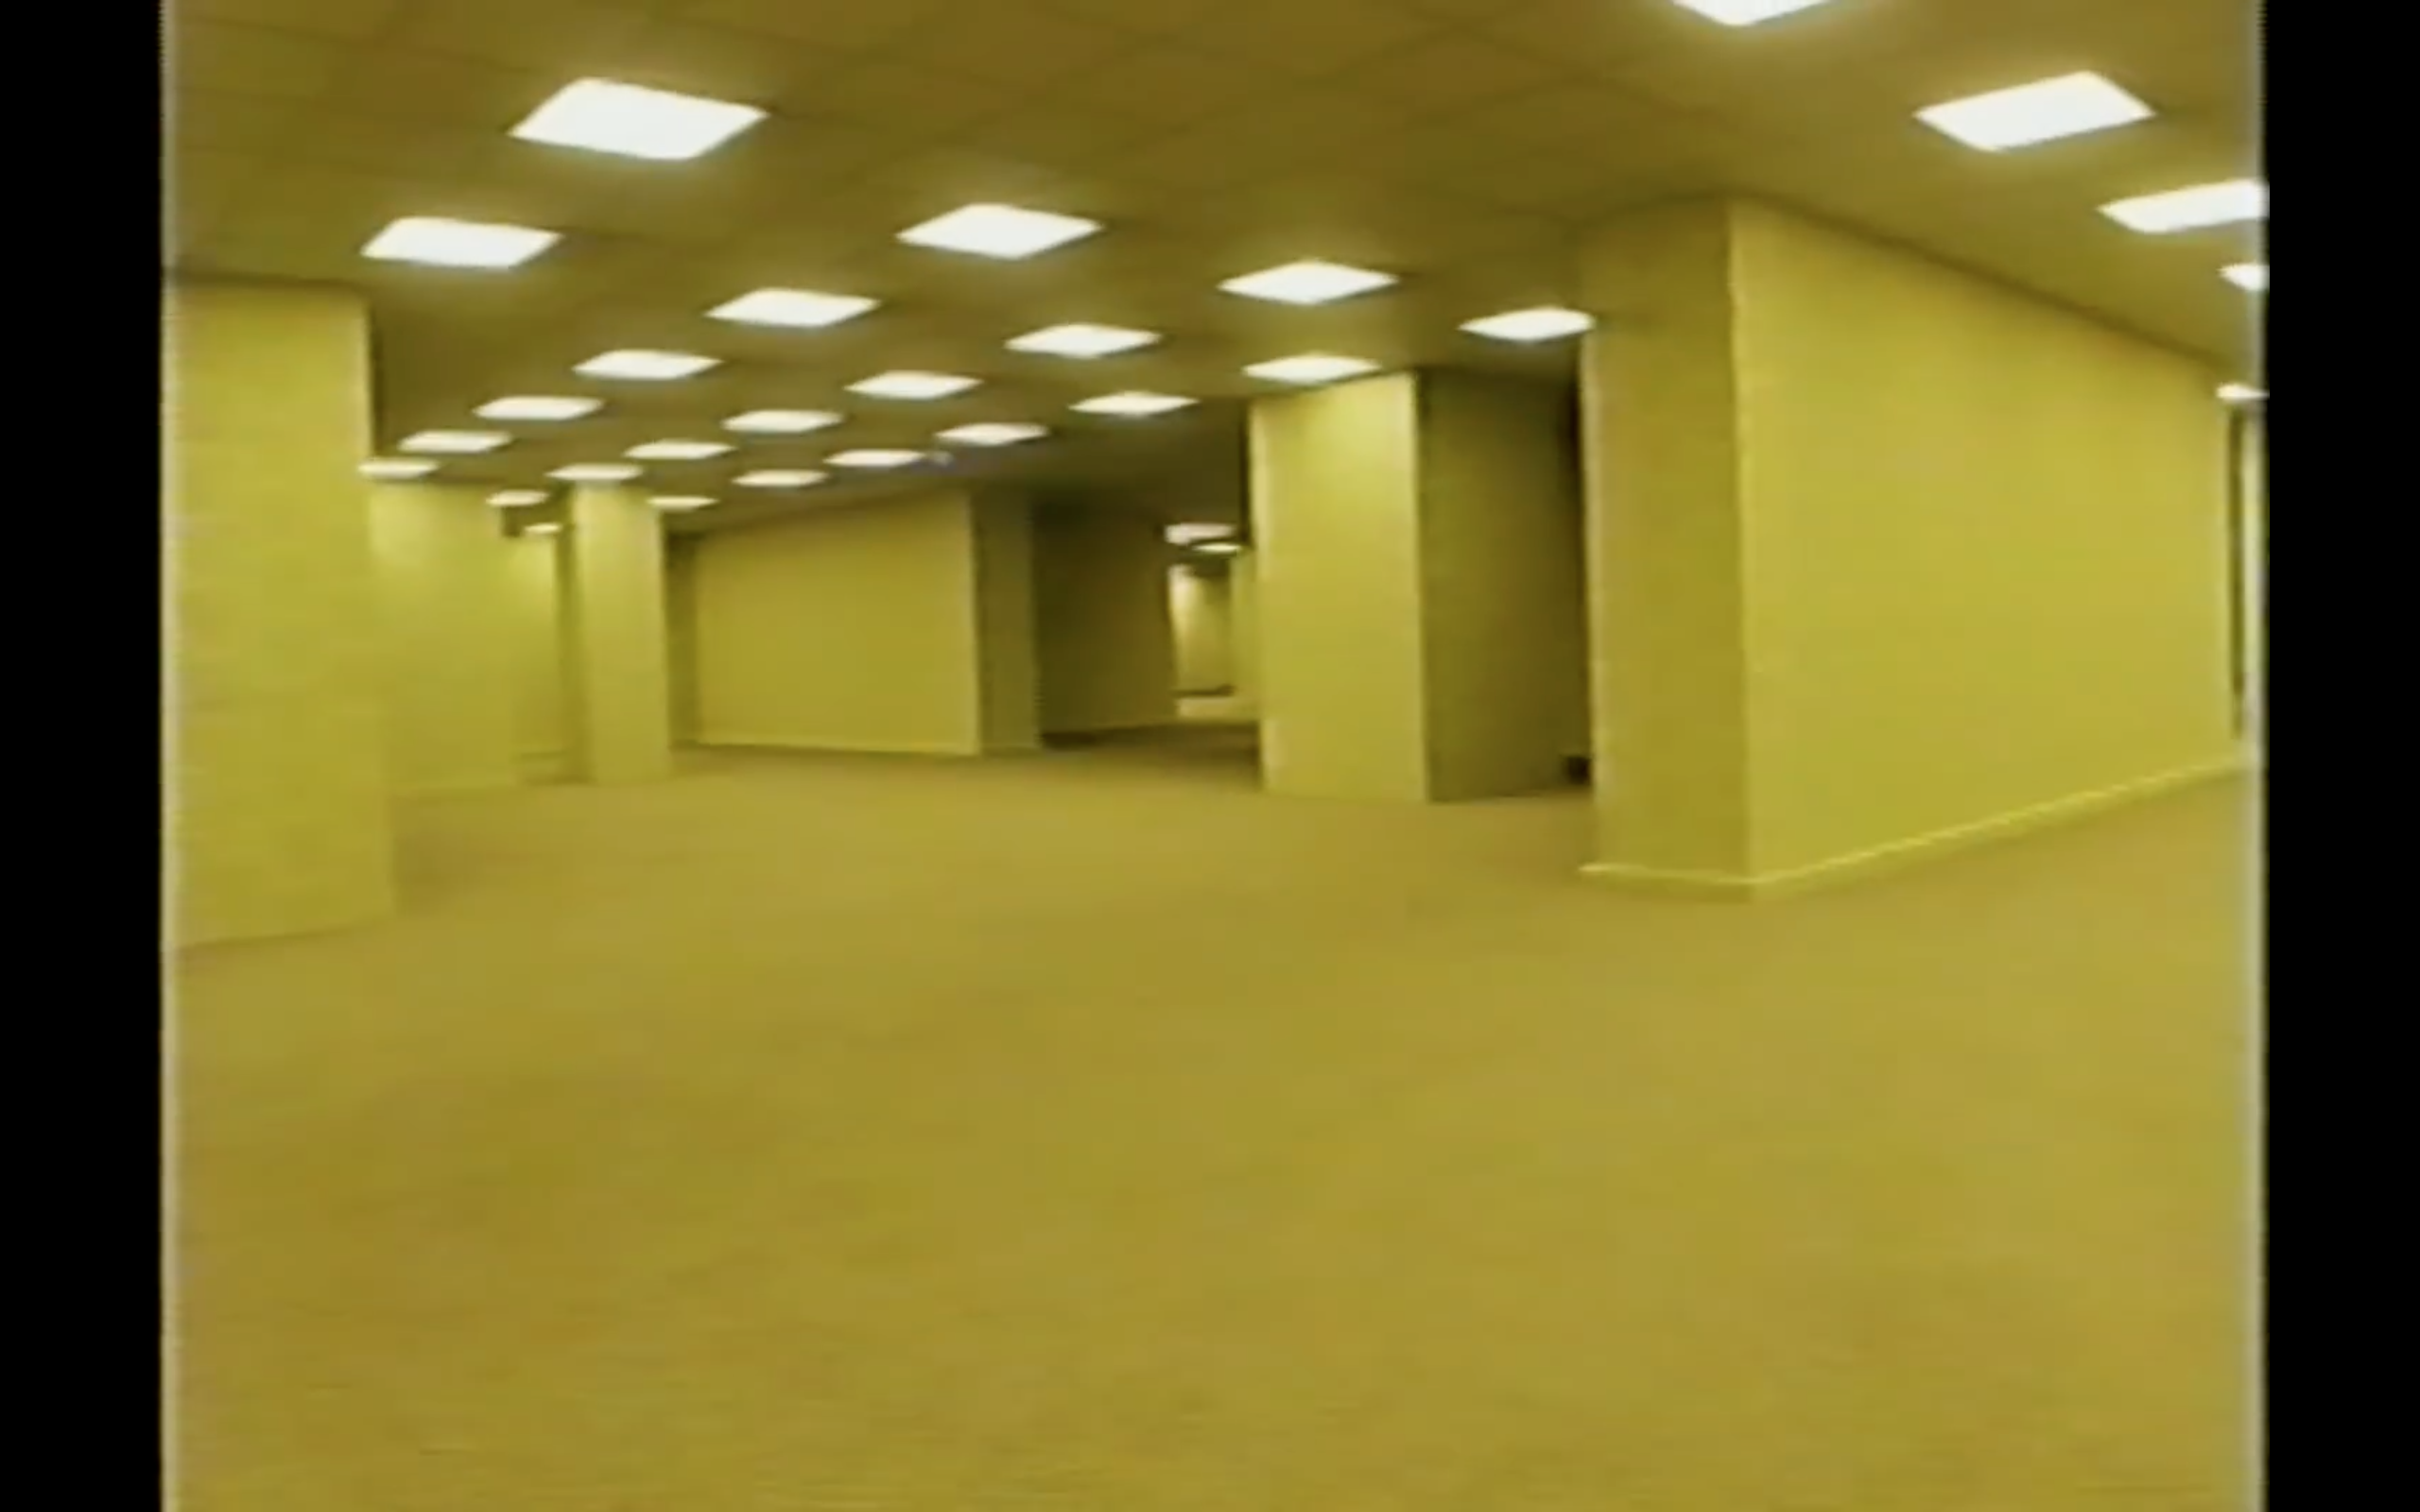 The Backrooms: Found Footage